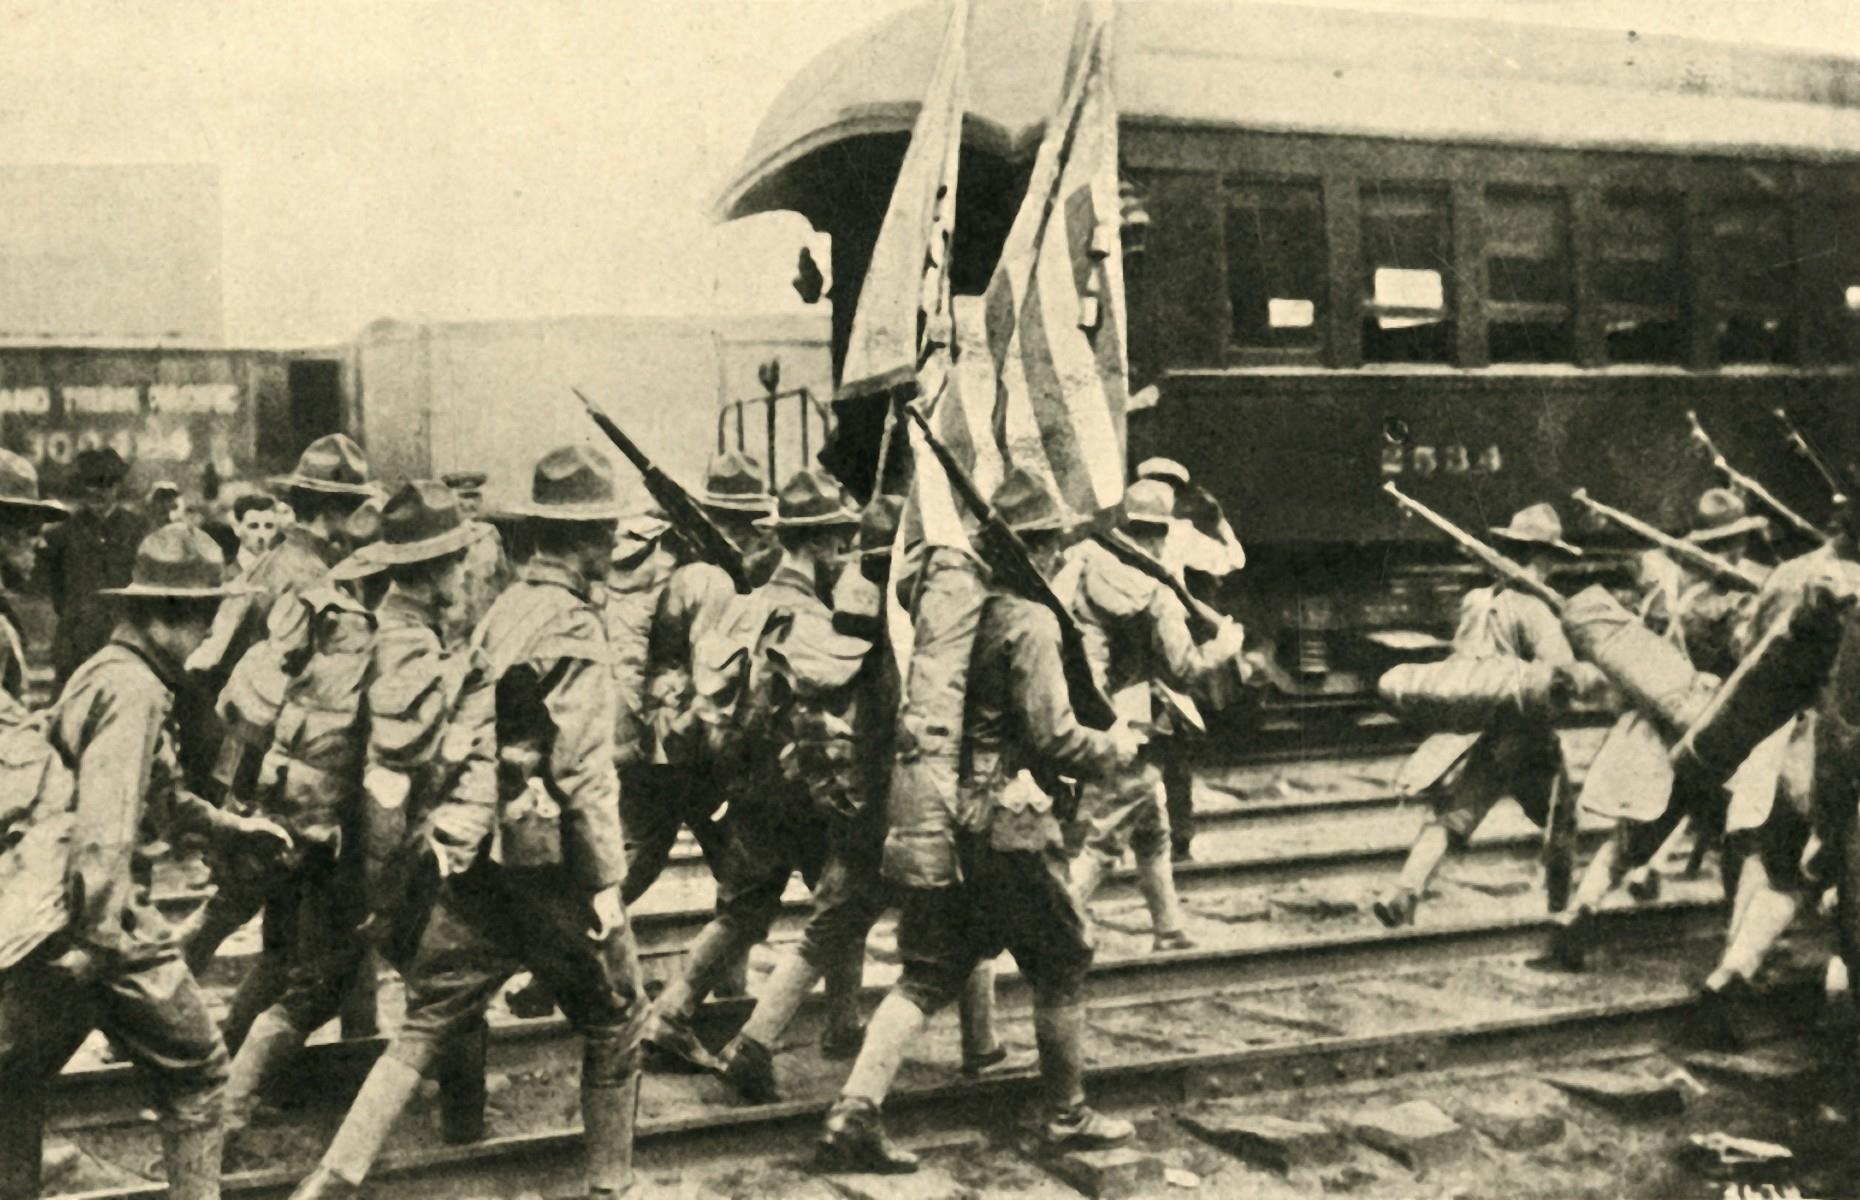 <p>By 1917, the American railroad system was beginning to show its age – and it couldn’t have come at a worse time. The USA had just joined the First World War, and rail infrastructure was going to be vital for troop mobilization and transporting supplies. The government stepped in by temporarily nationalizing the railroads, pouring money into updating and standardizing tracks, stations and rolling stock. Three years later the railroads were transferred back into private hands, although the government retained an increased level of oversight.</p>